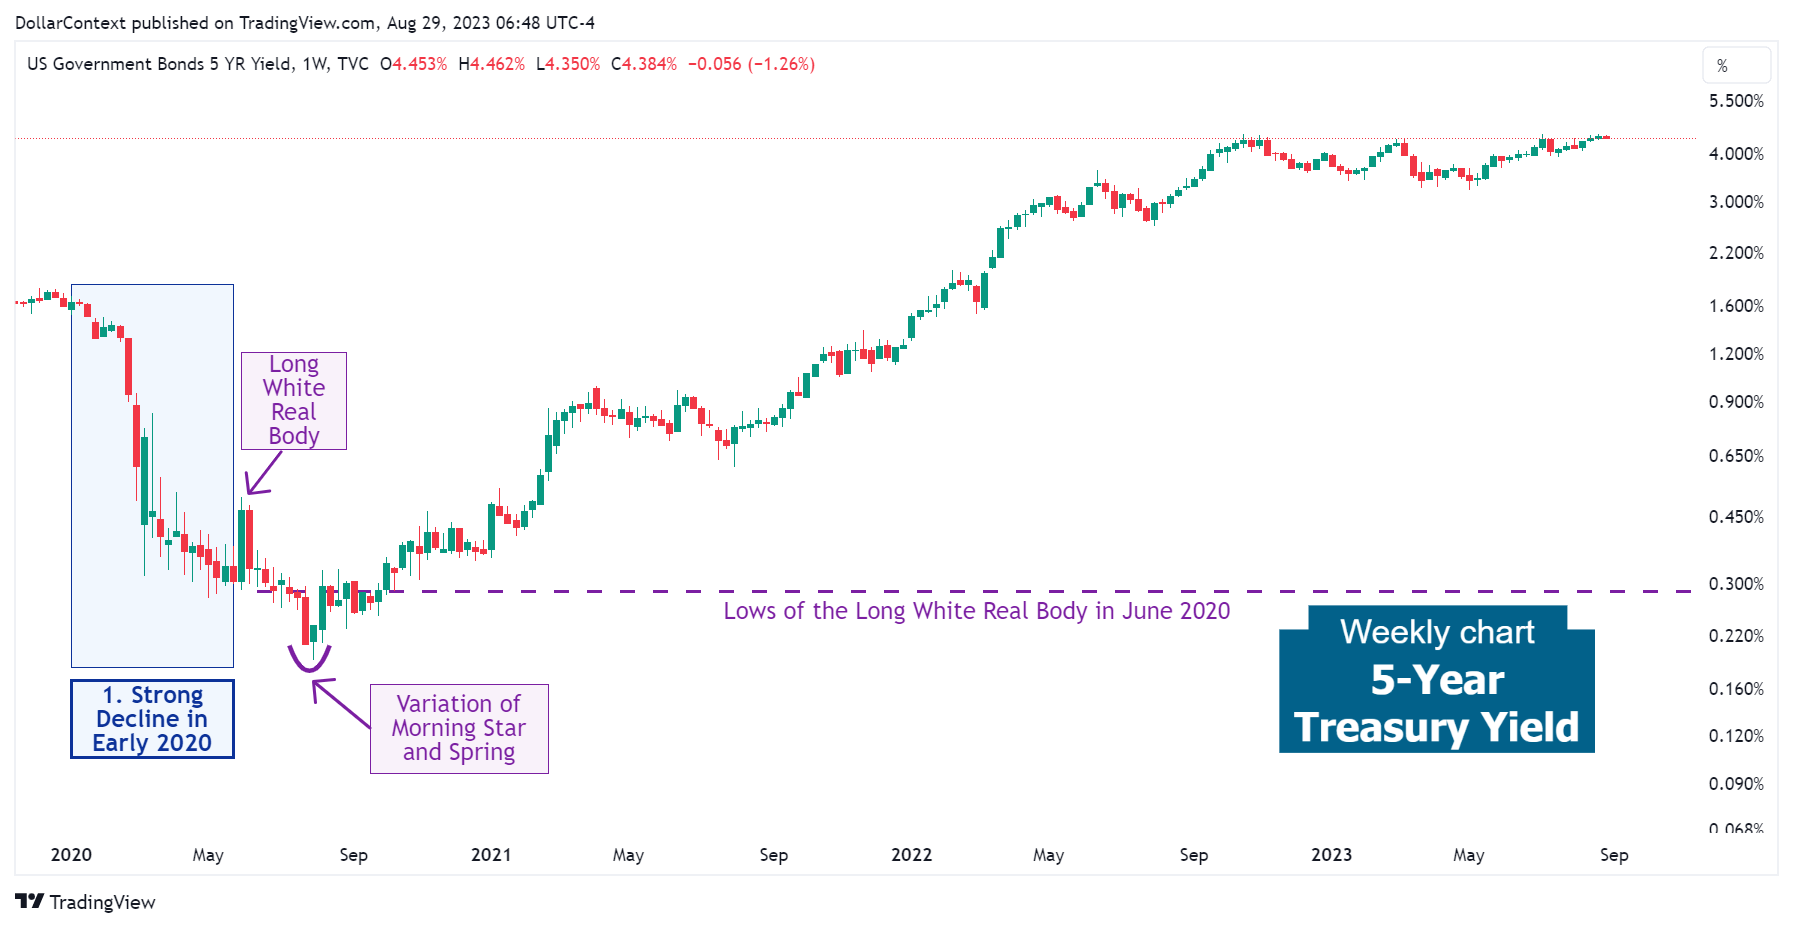 5-Year Treasury Yield: The Strong Decline in Early 2020 (Weekly Chart)